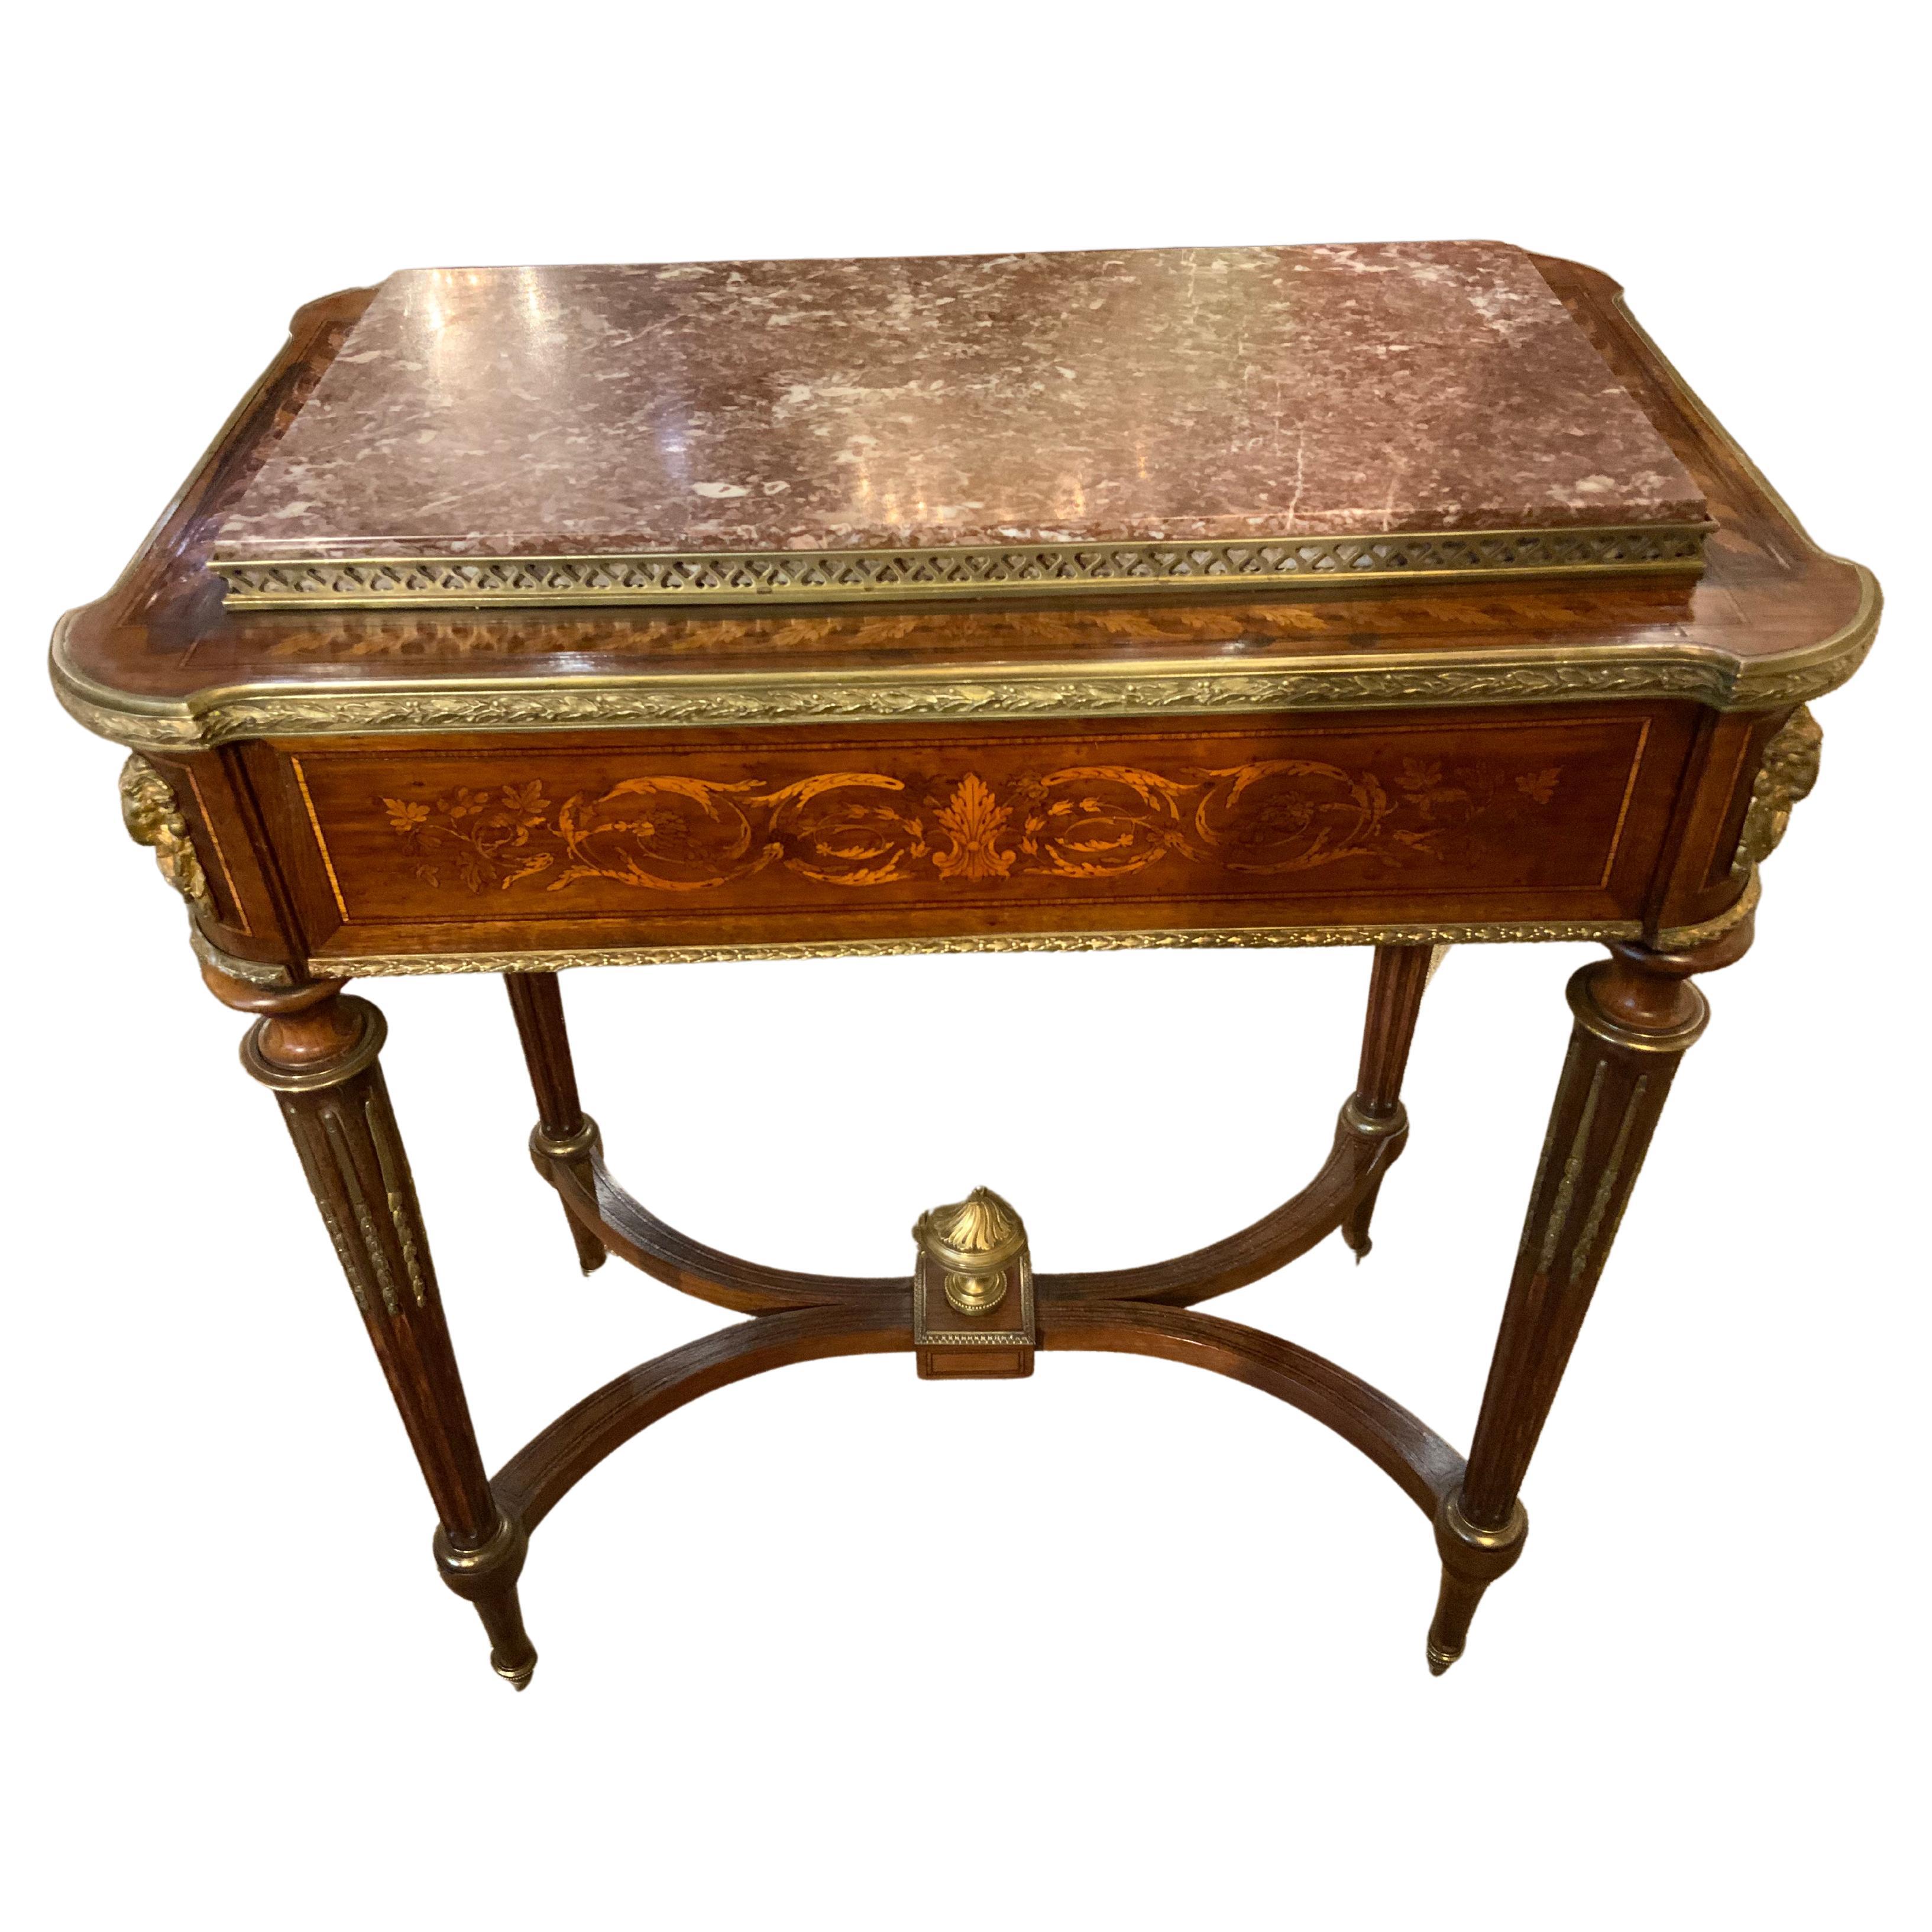 French Louis XVI-Style Table, 19th Century with Marquetry Inlay, Marble Top